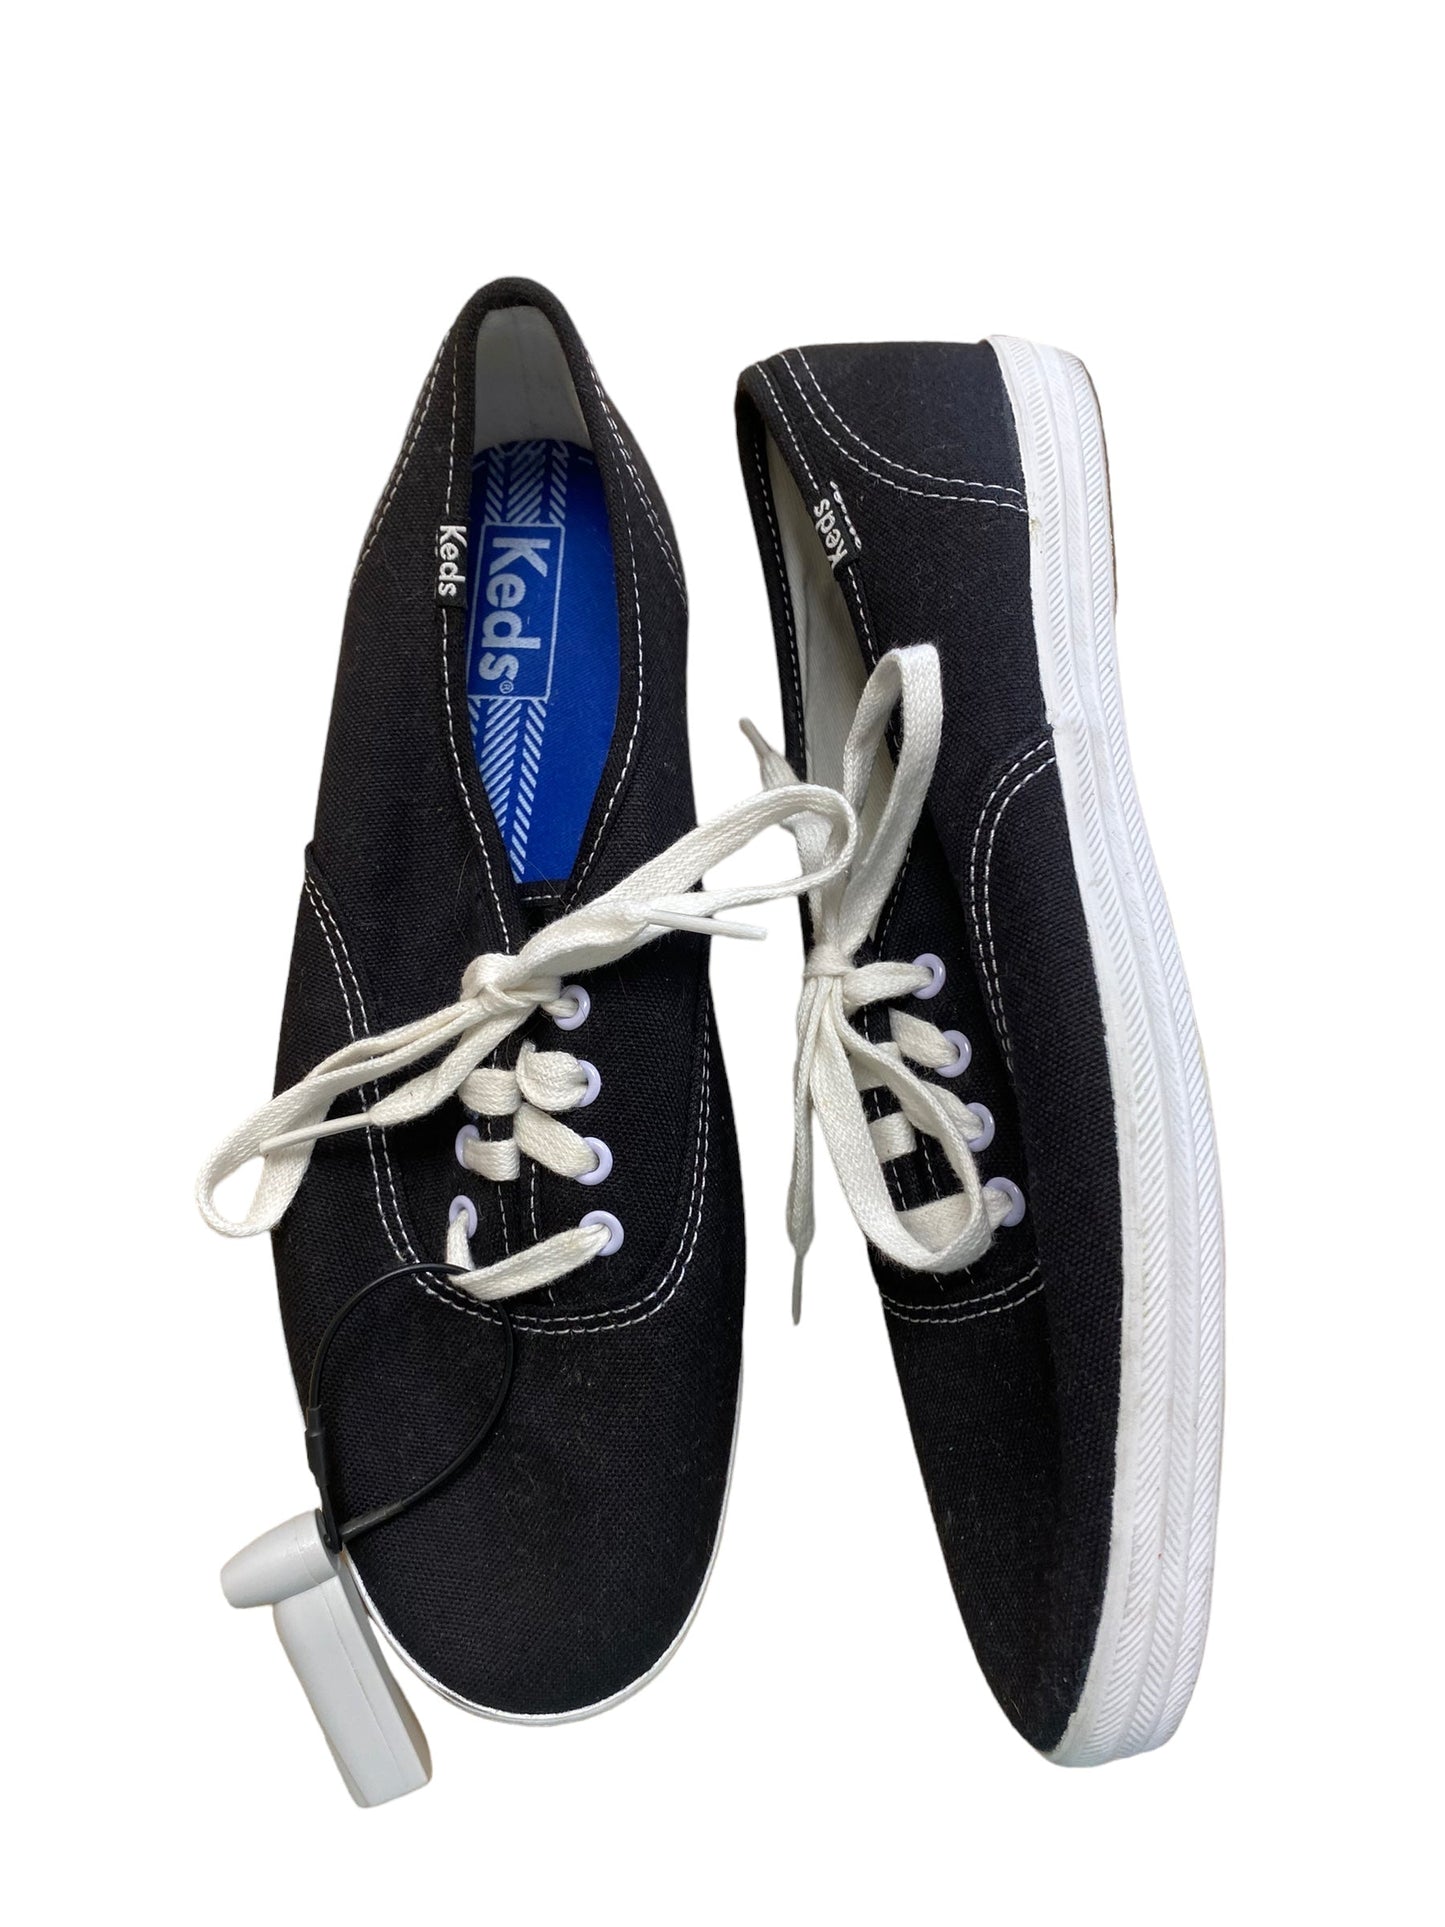 Shoes Sneakers By Keds  Size: 8